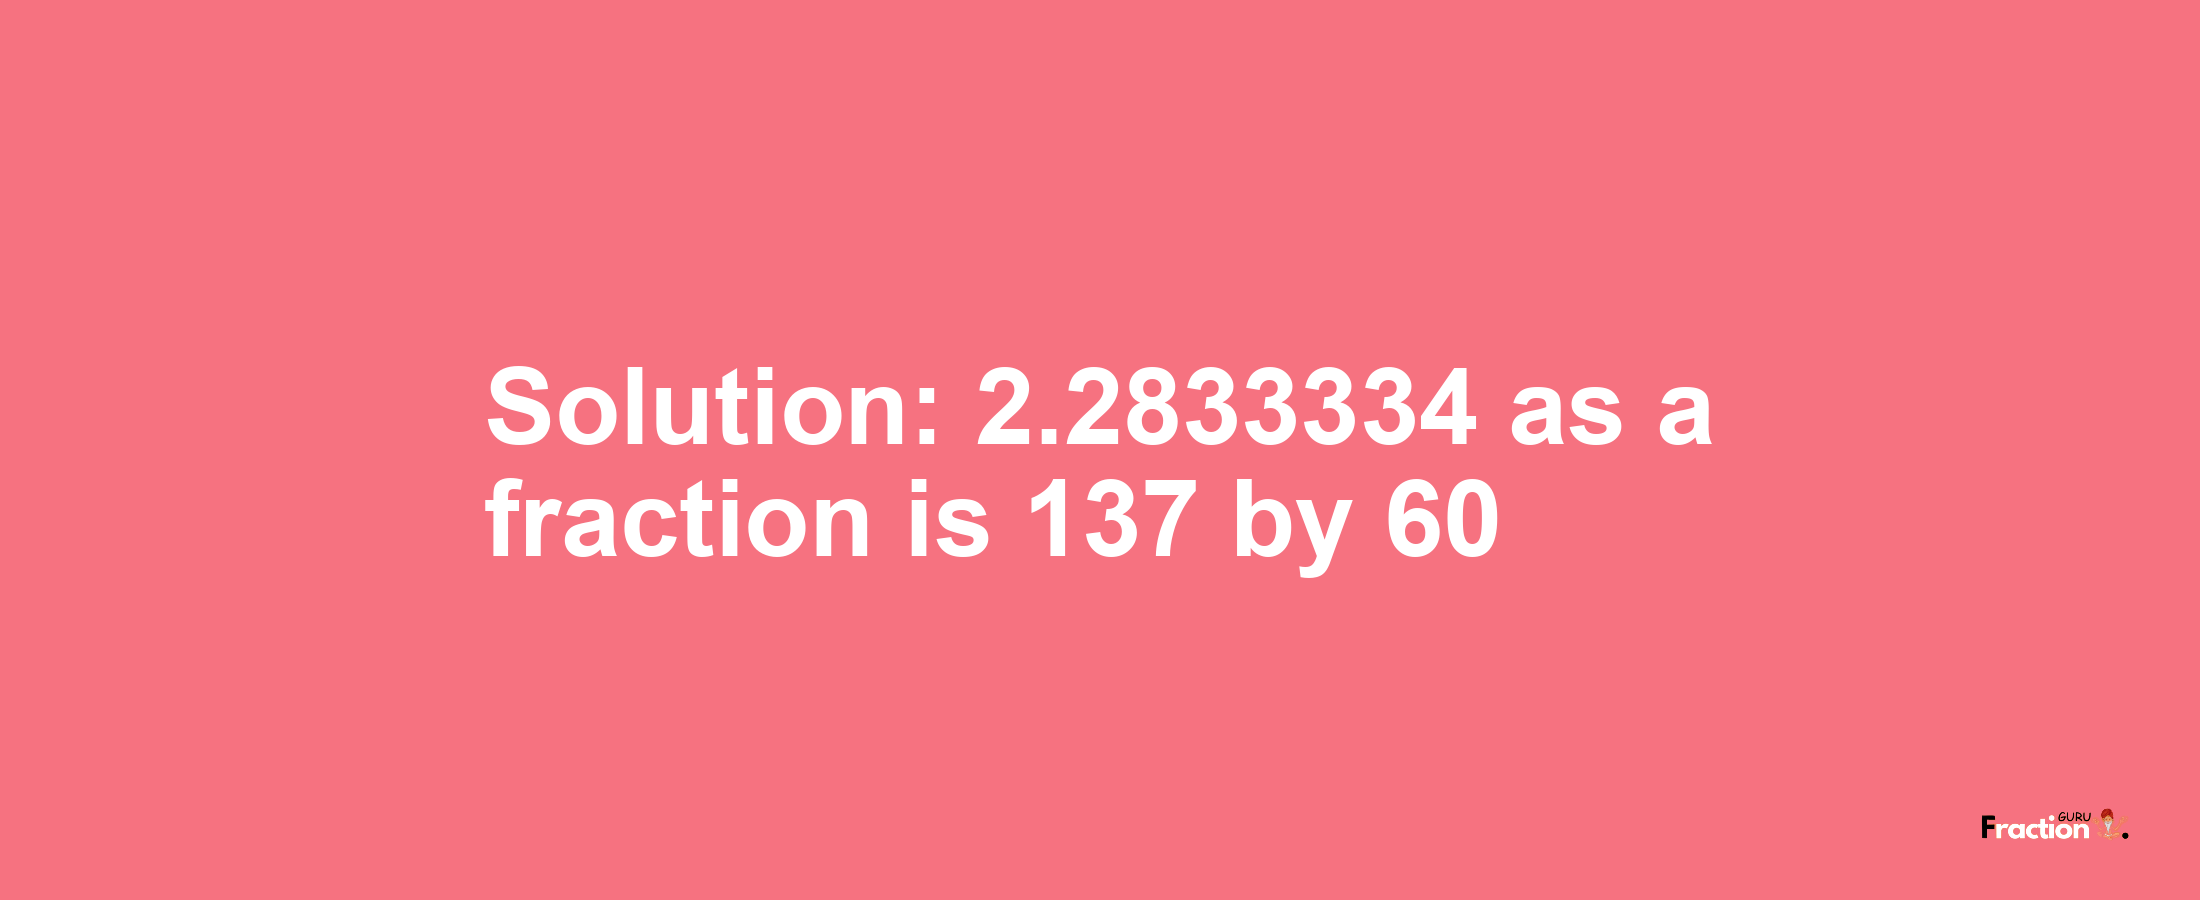 Solution:2.2833334 as a fraction is 137/60